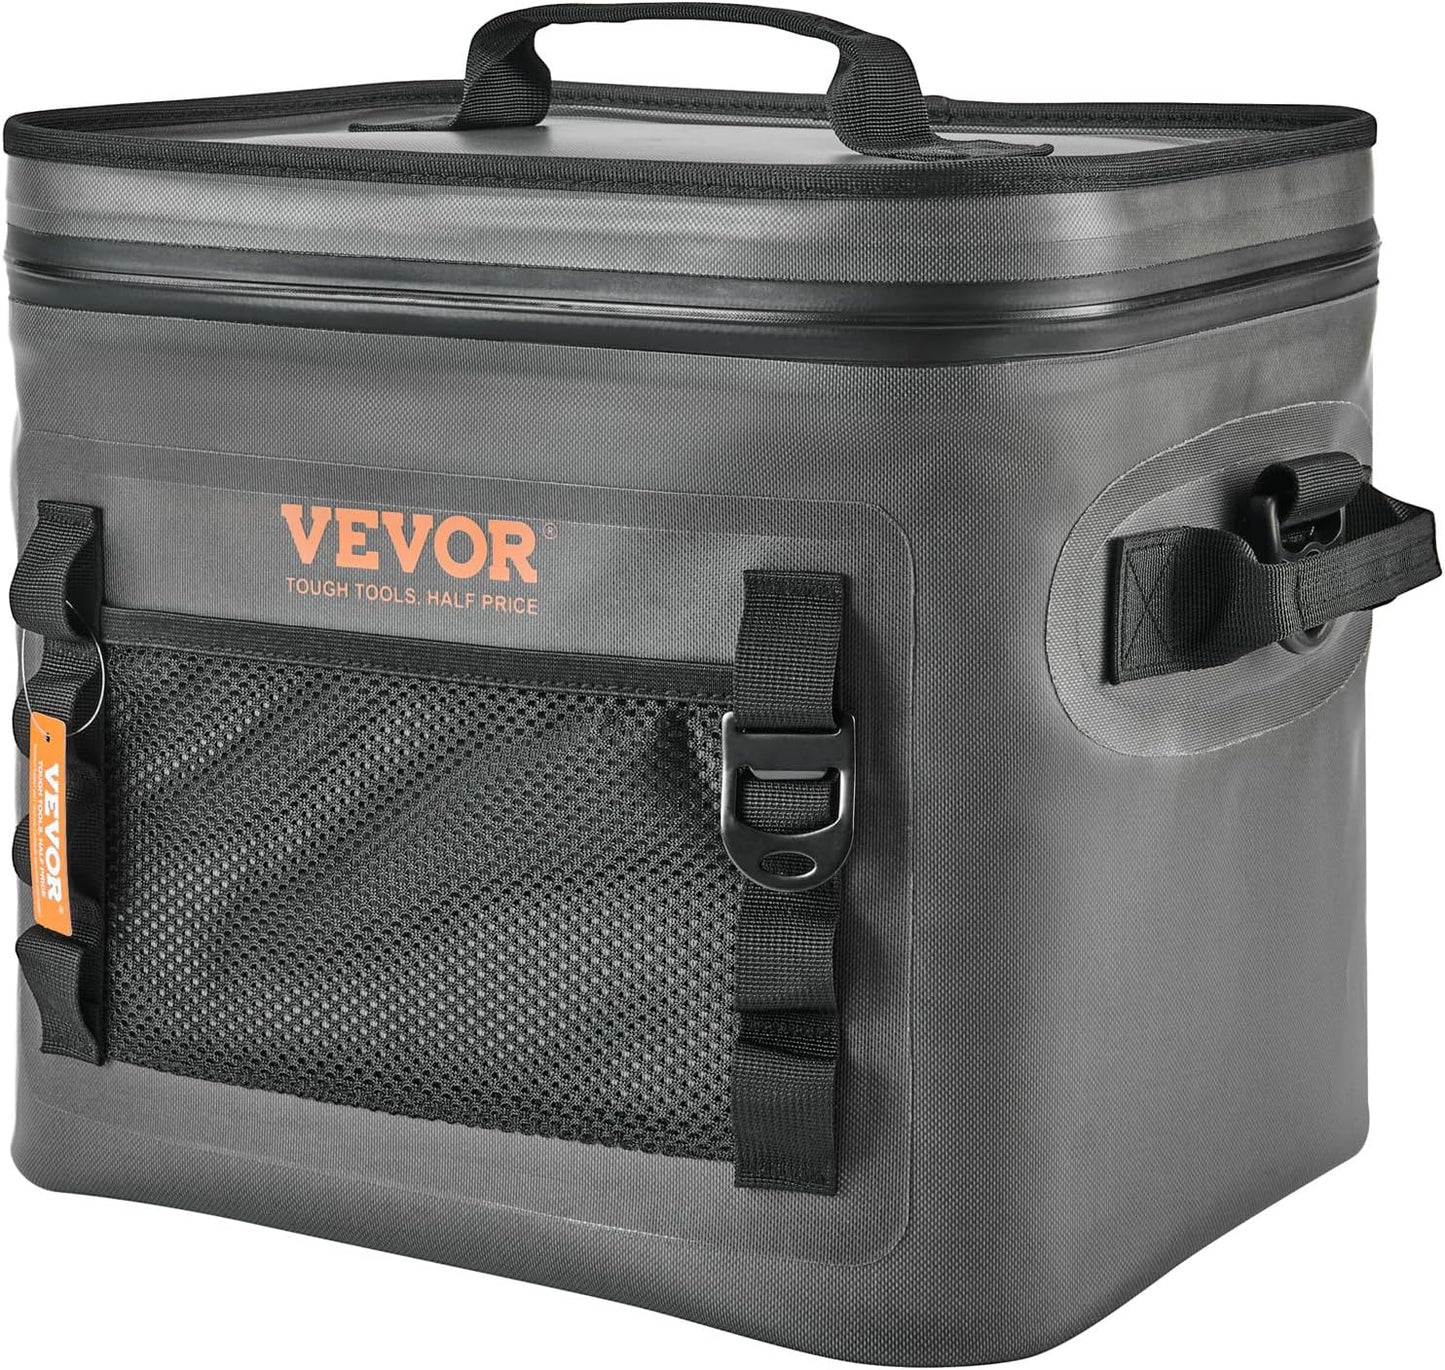 VEVOR Soft Cooler 16\/24\/30 Cans Insulated Cooler Bag Leakproof Waterproof Lunch Soft Cooler Lightweight & Portable Cooler for Beach, Hiking, Camping, Travel, Picnic, Car, Cooler